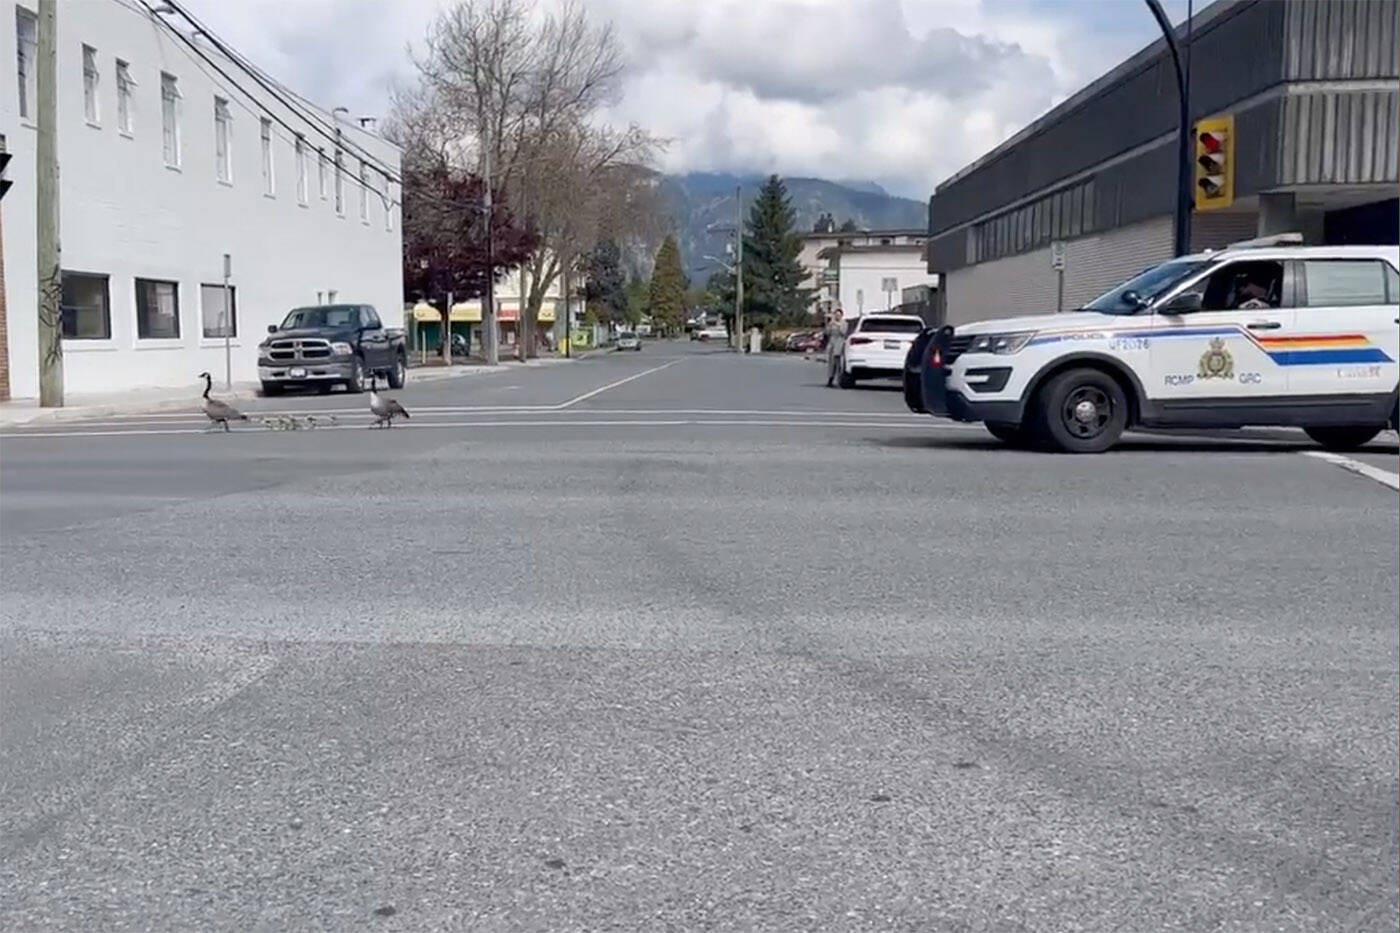 A Chilliwack RCMP officer helps escort a family of Canada geese across Yale Road in Chilliwack on Friday, April 29, 2022. (Amara Jacklynn Moore)